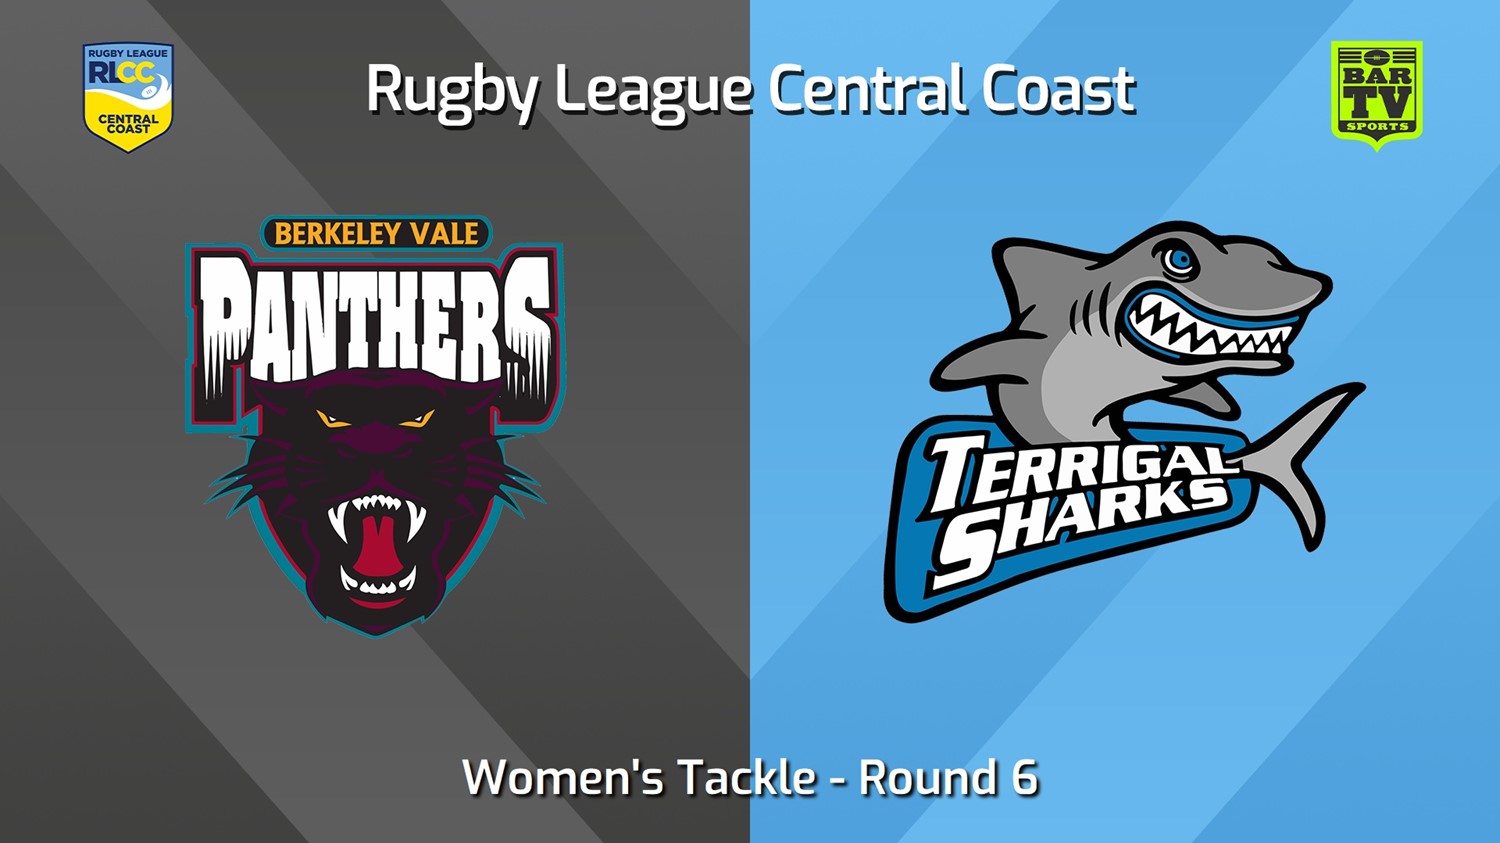 240526-video-RLCC Round 6 - Women's Tackle - Berkeley Vale Panthers v Terrigal Sharks Minigame Slate Image